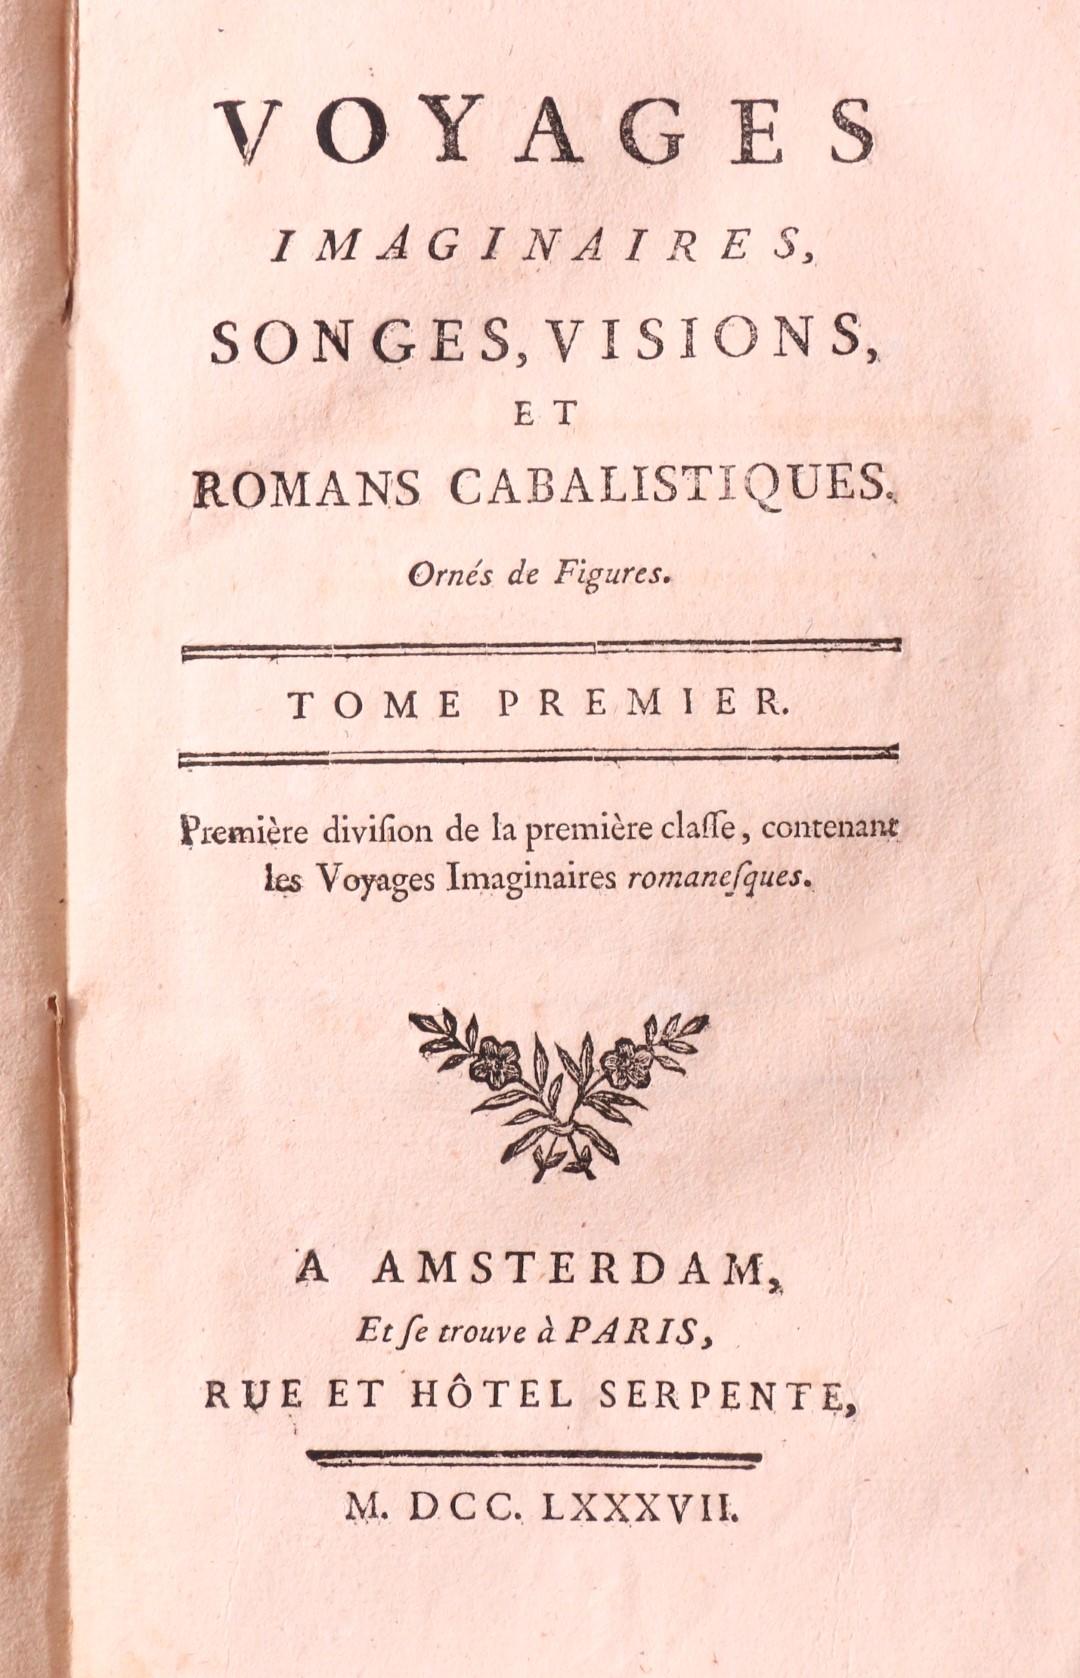 Charles George Thomas Garnier [ed.] - Voyages Imaginaires, Songes, Visions, et Romans Cabalistiques - No Publisher, 1787-1789, First Edition.